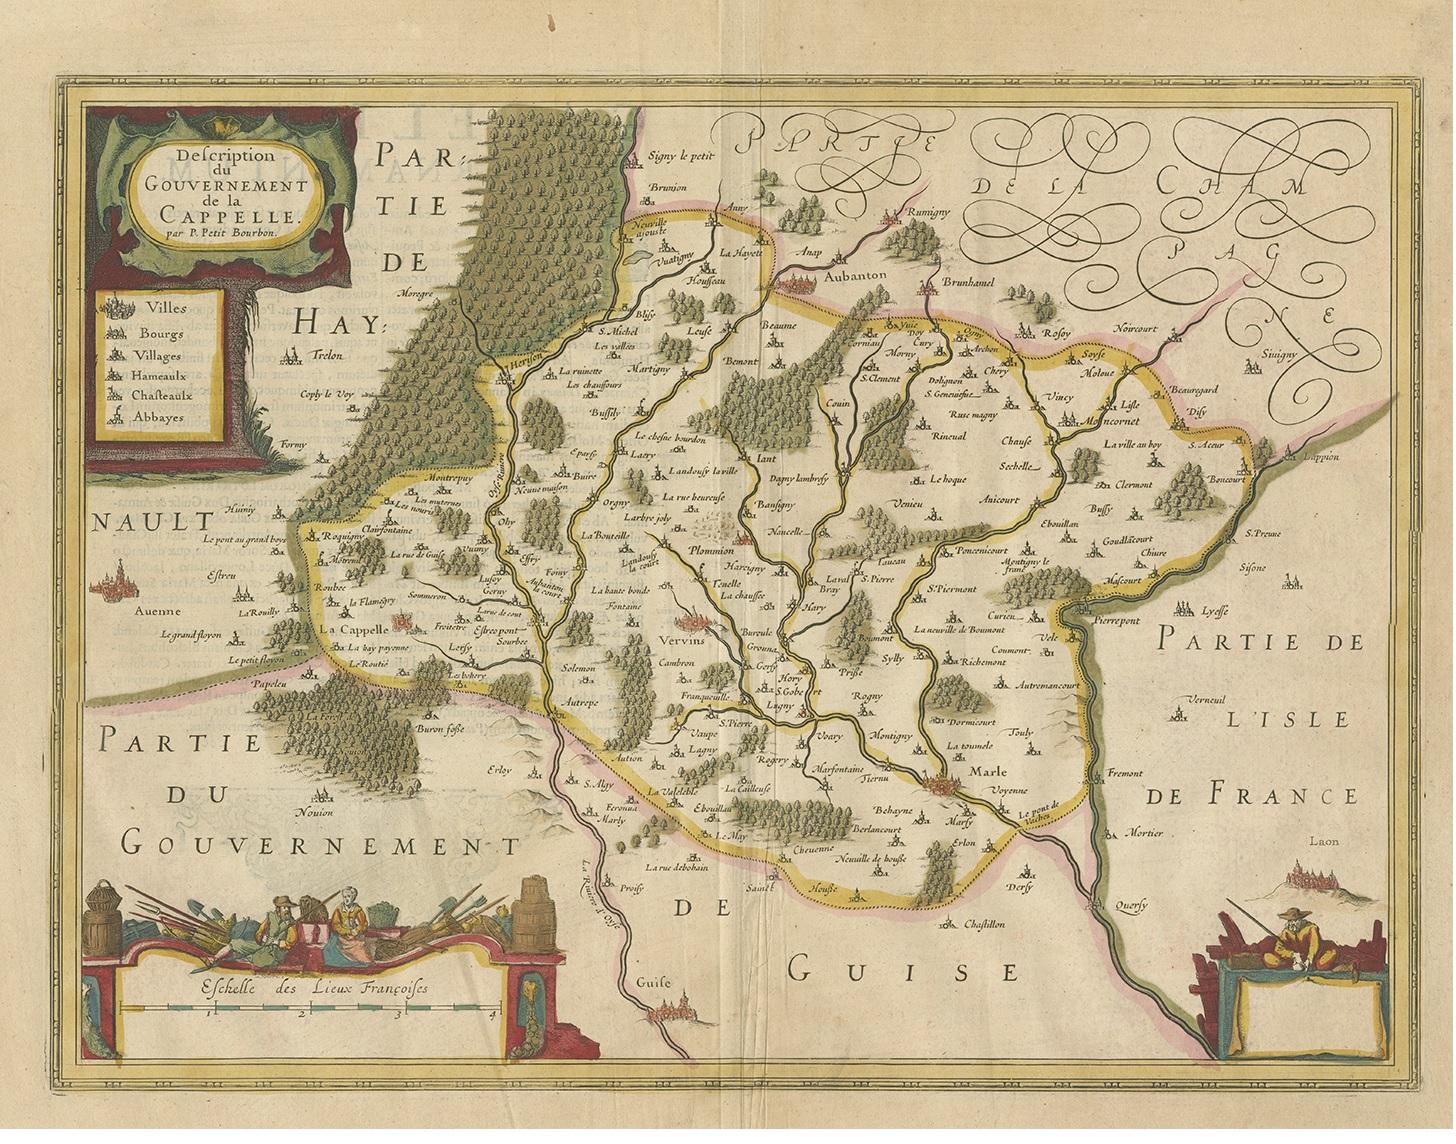 Antique map titled 'Description du Gouvernement de la Cappelle'. Old map of the region of Hauts-de-France including the cities of Vervins, Marle, Cappelle and others. This map originates from a composite atlas and most likely published by Hondius.